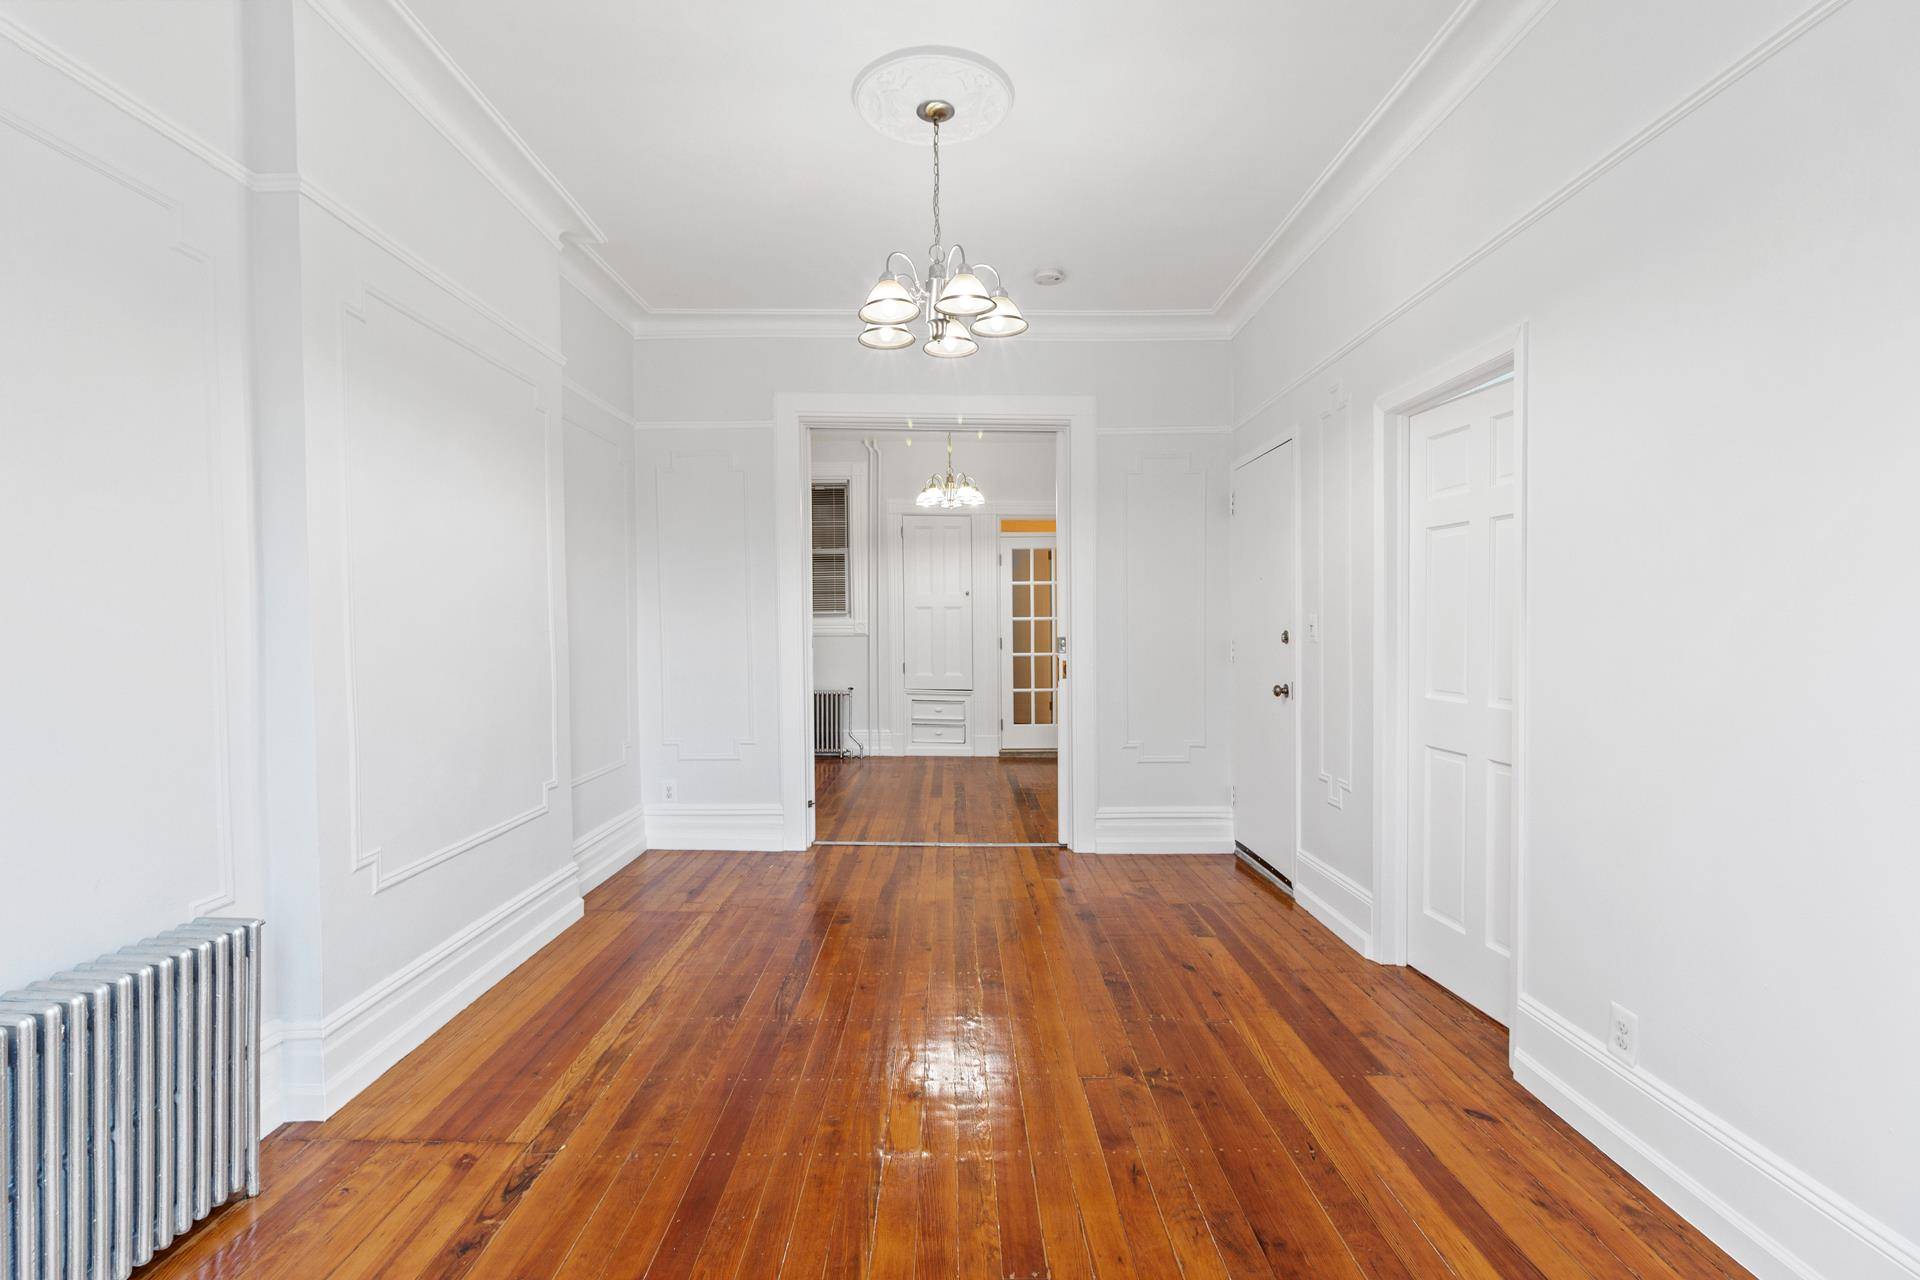 Back on The Market ! Welcome to 420 2nd St walk to flights up to your floor through apartment.